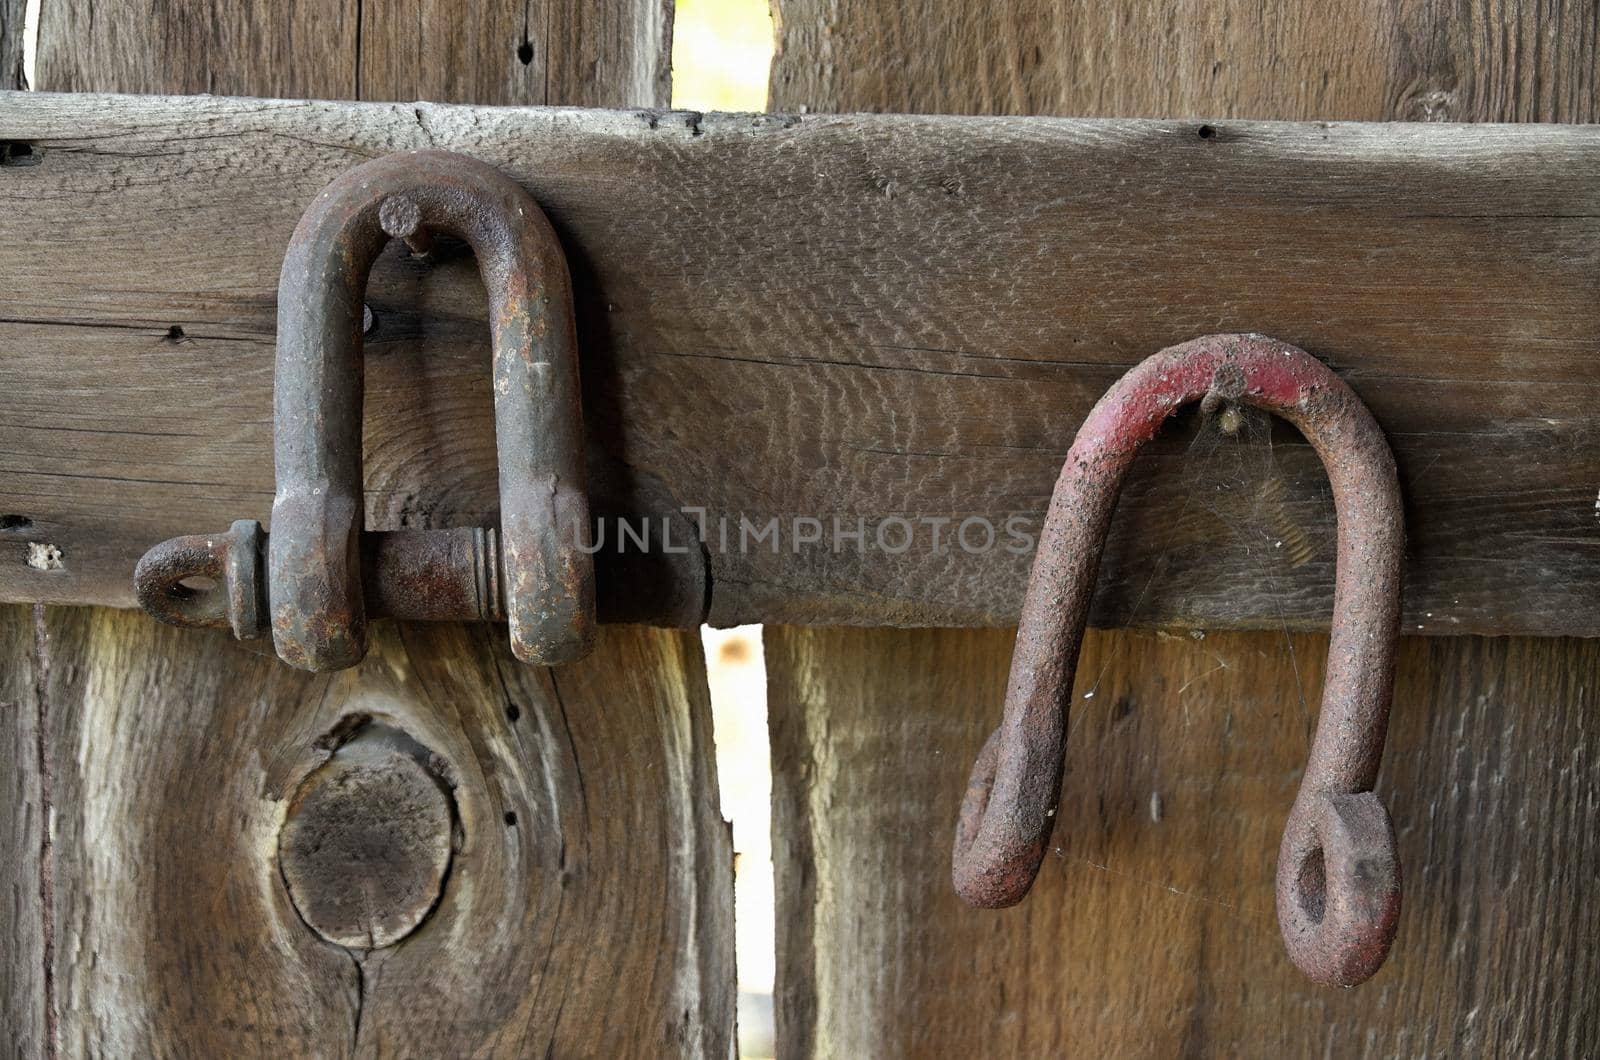 Vintage rusty U bolts hanging on nails in a barn by markvandam